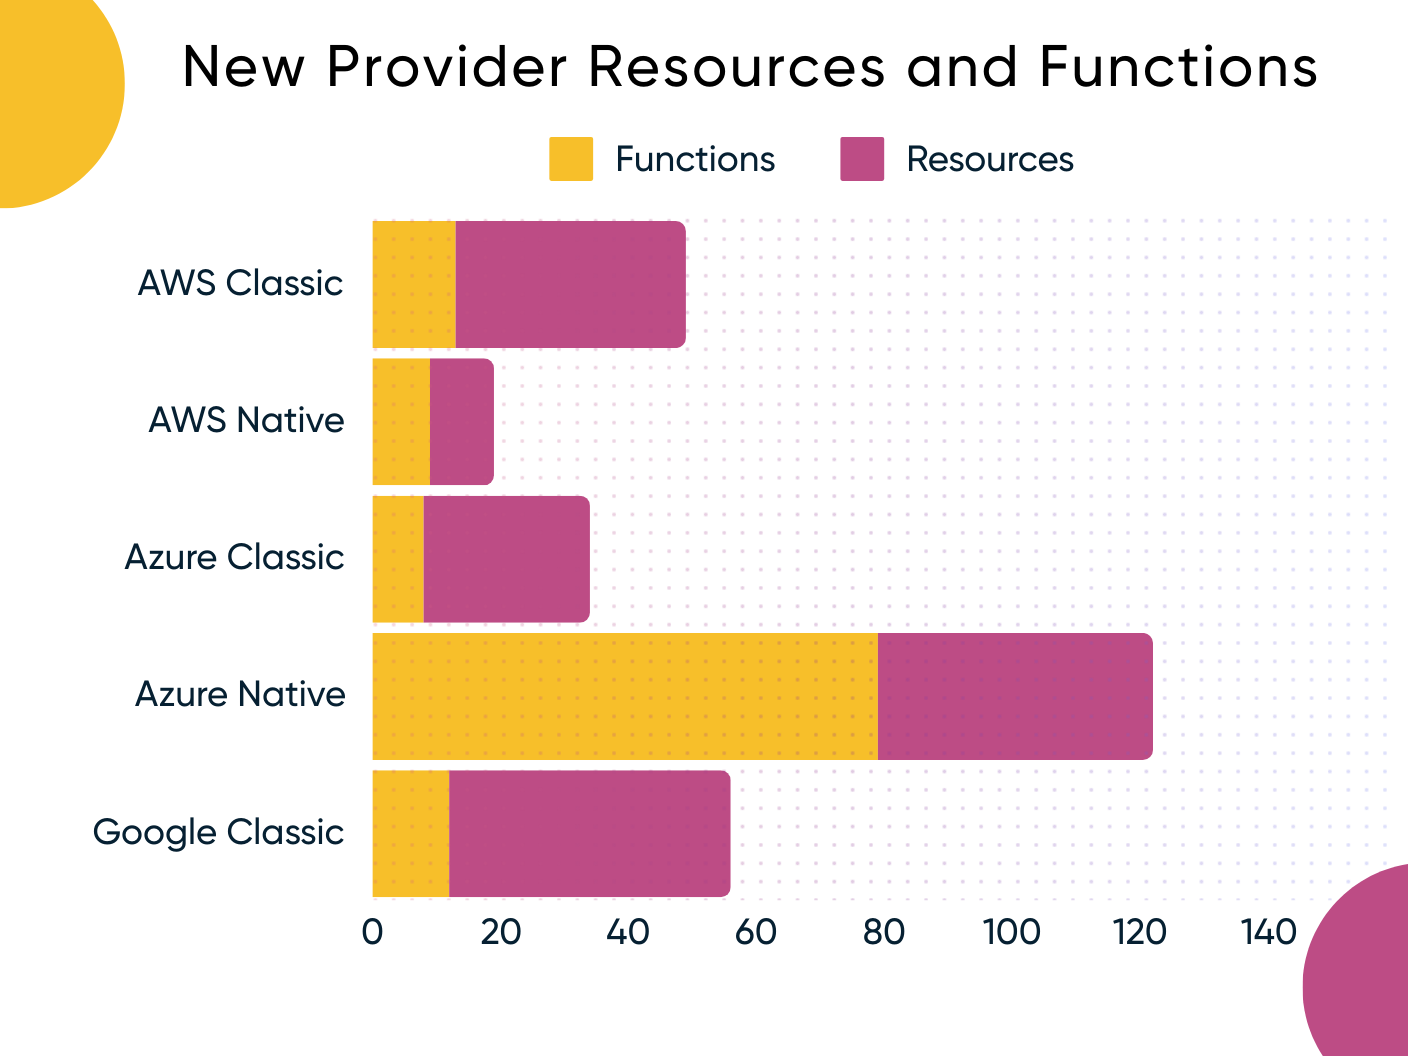 New Provider Resources and Functions